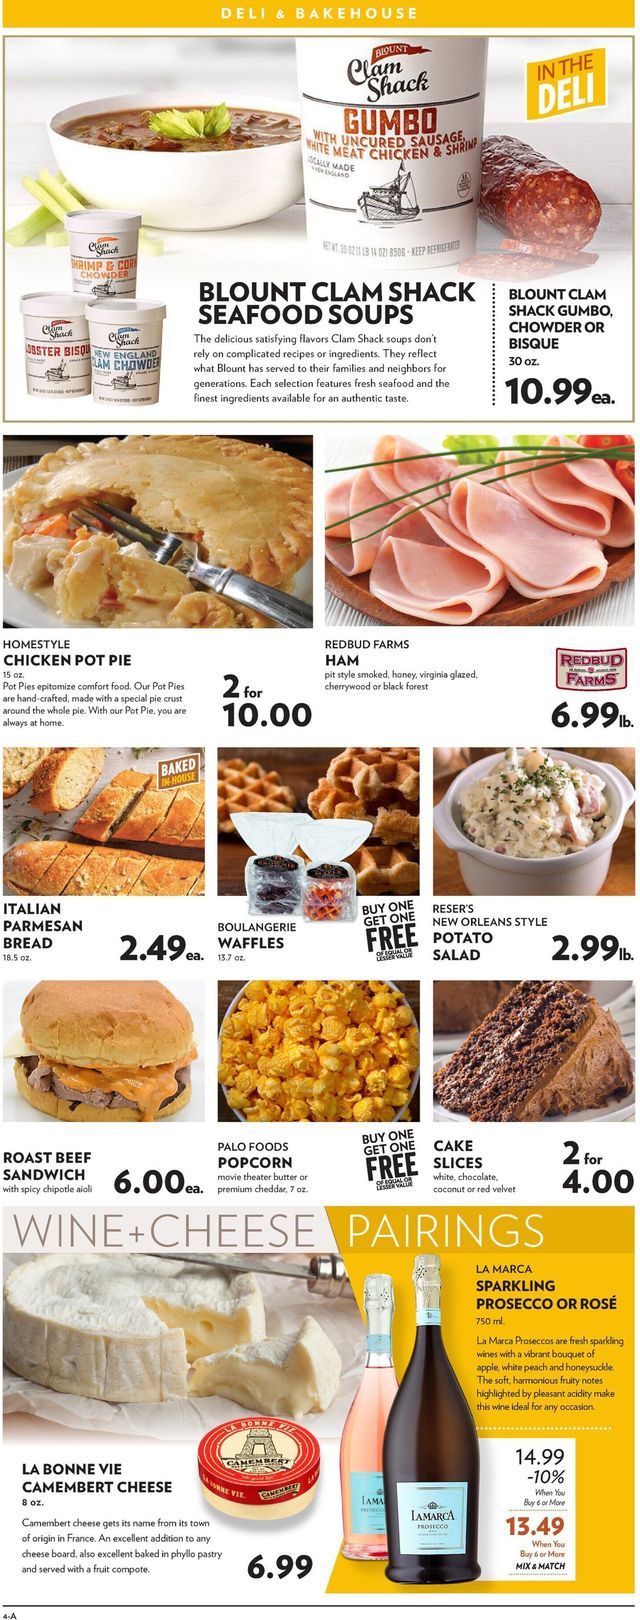 Reasor's Ad from 02/16/2022